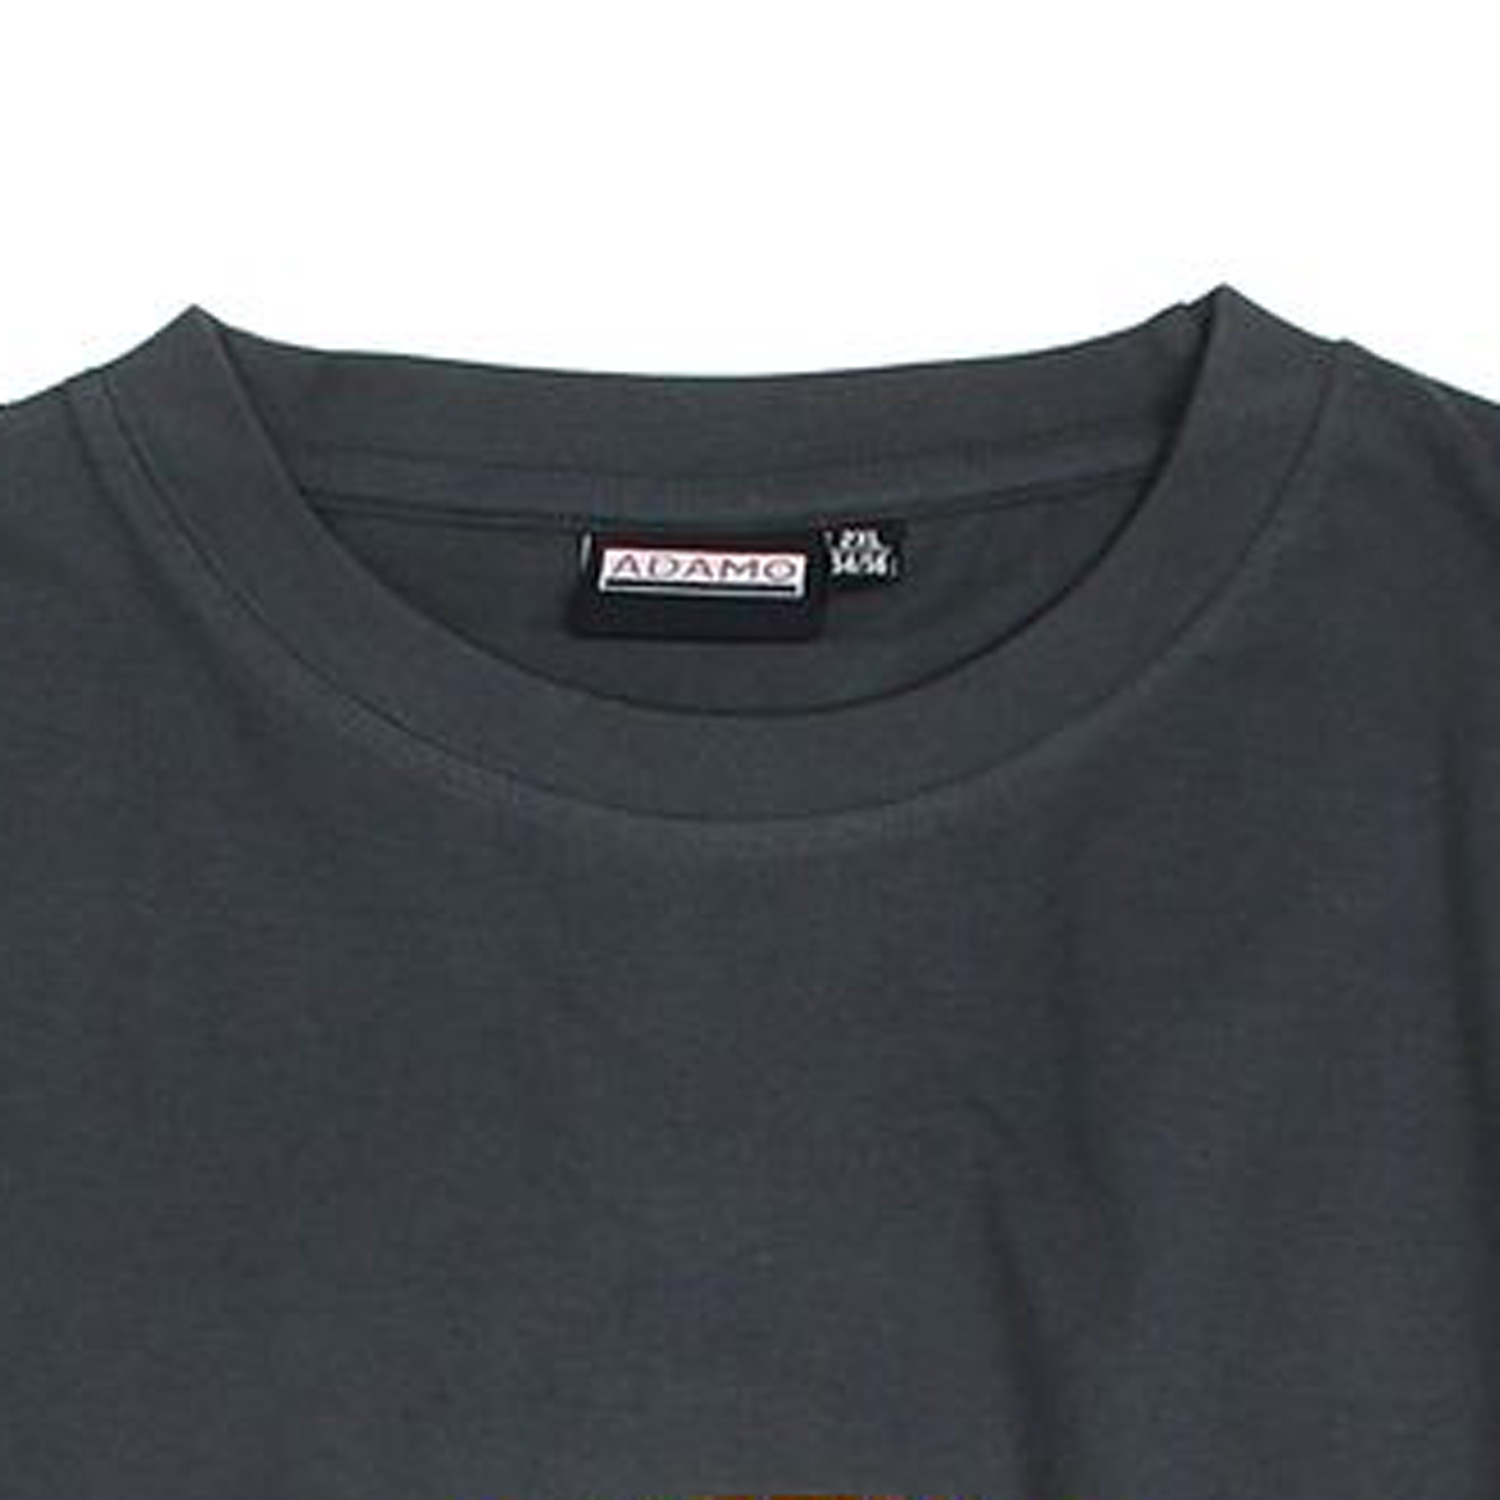 T-shirt in anthracite with imprint by Adamo up to oversize 12XL